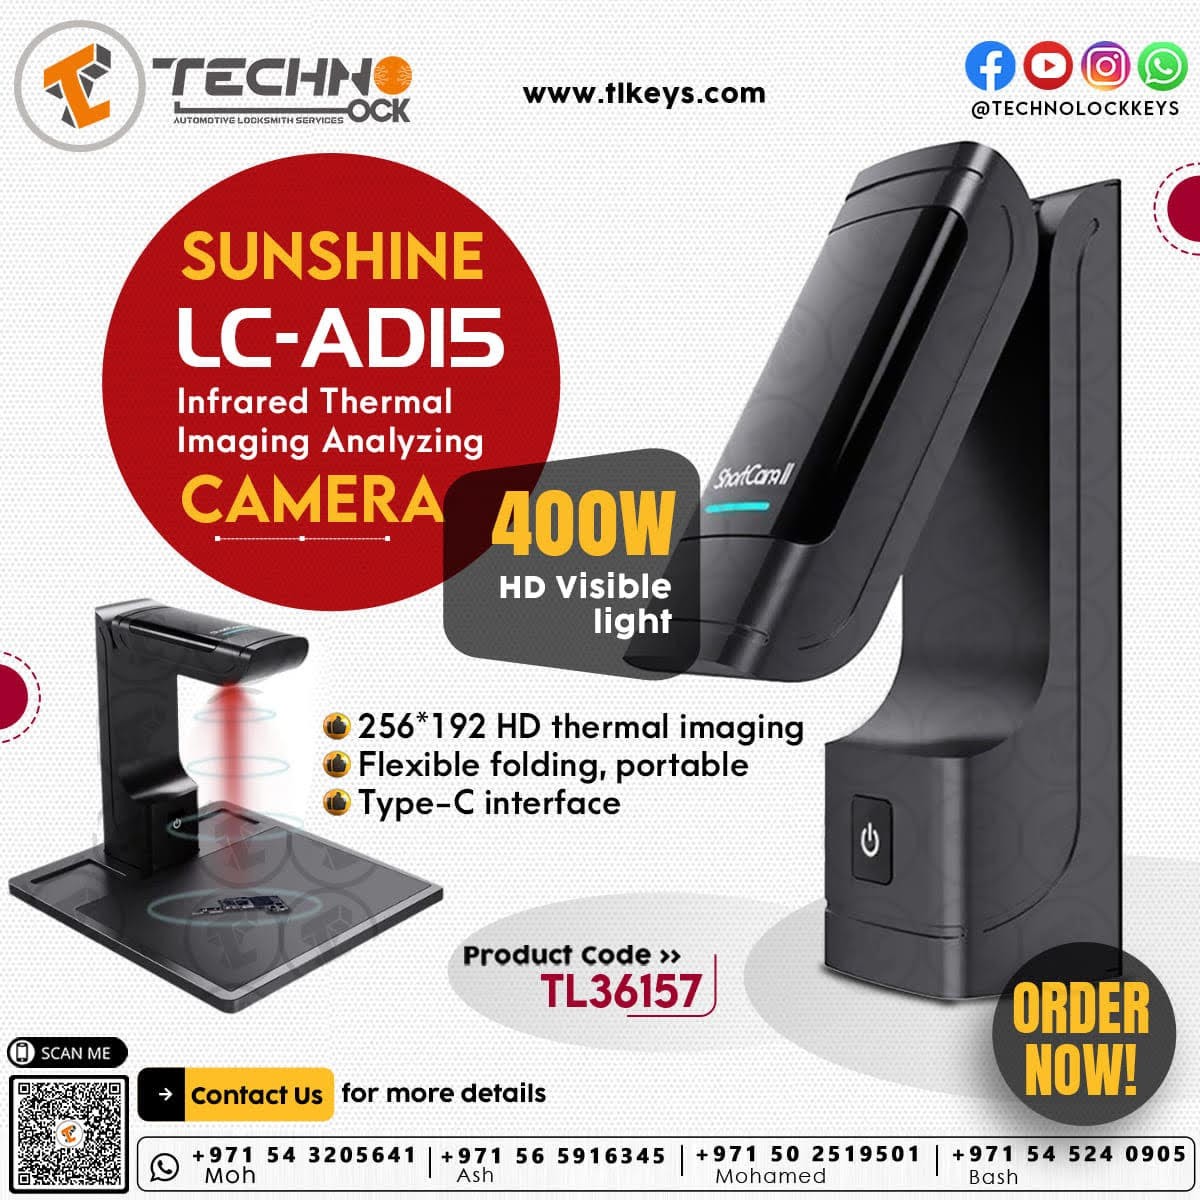 SUNSHINE LC-AD15 Infrared Thermal Imaging Analyzing Camera - Enhance motherboard repair with advanced thermal imaging technology